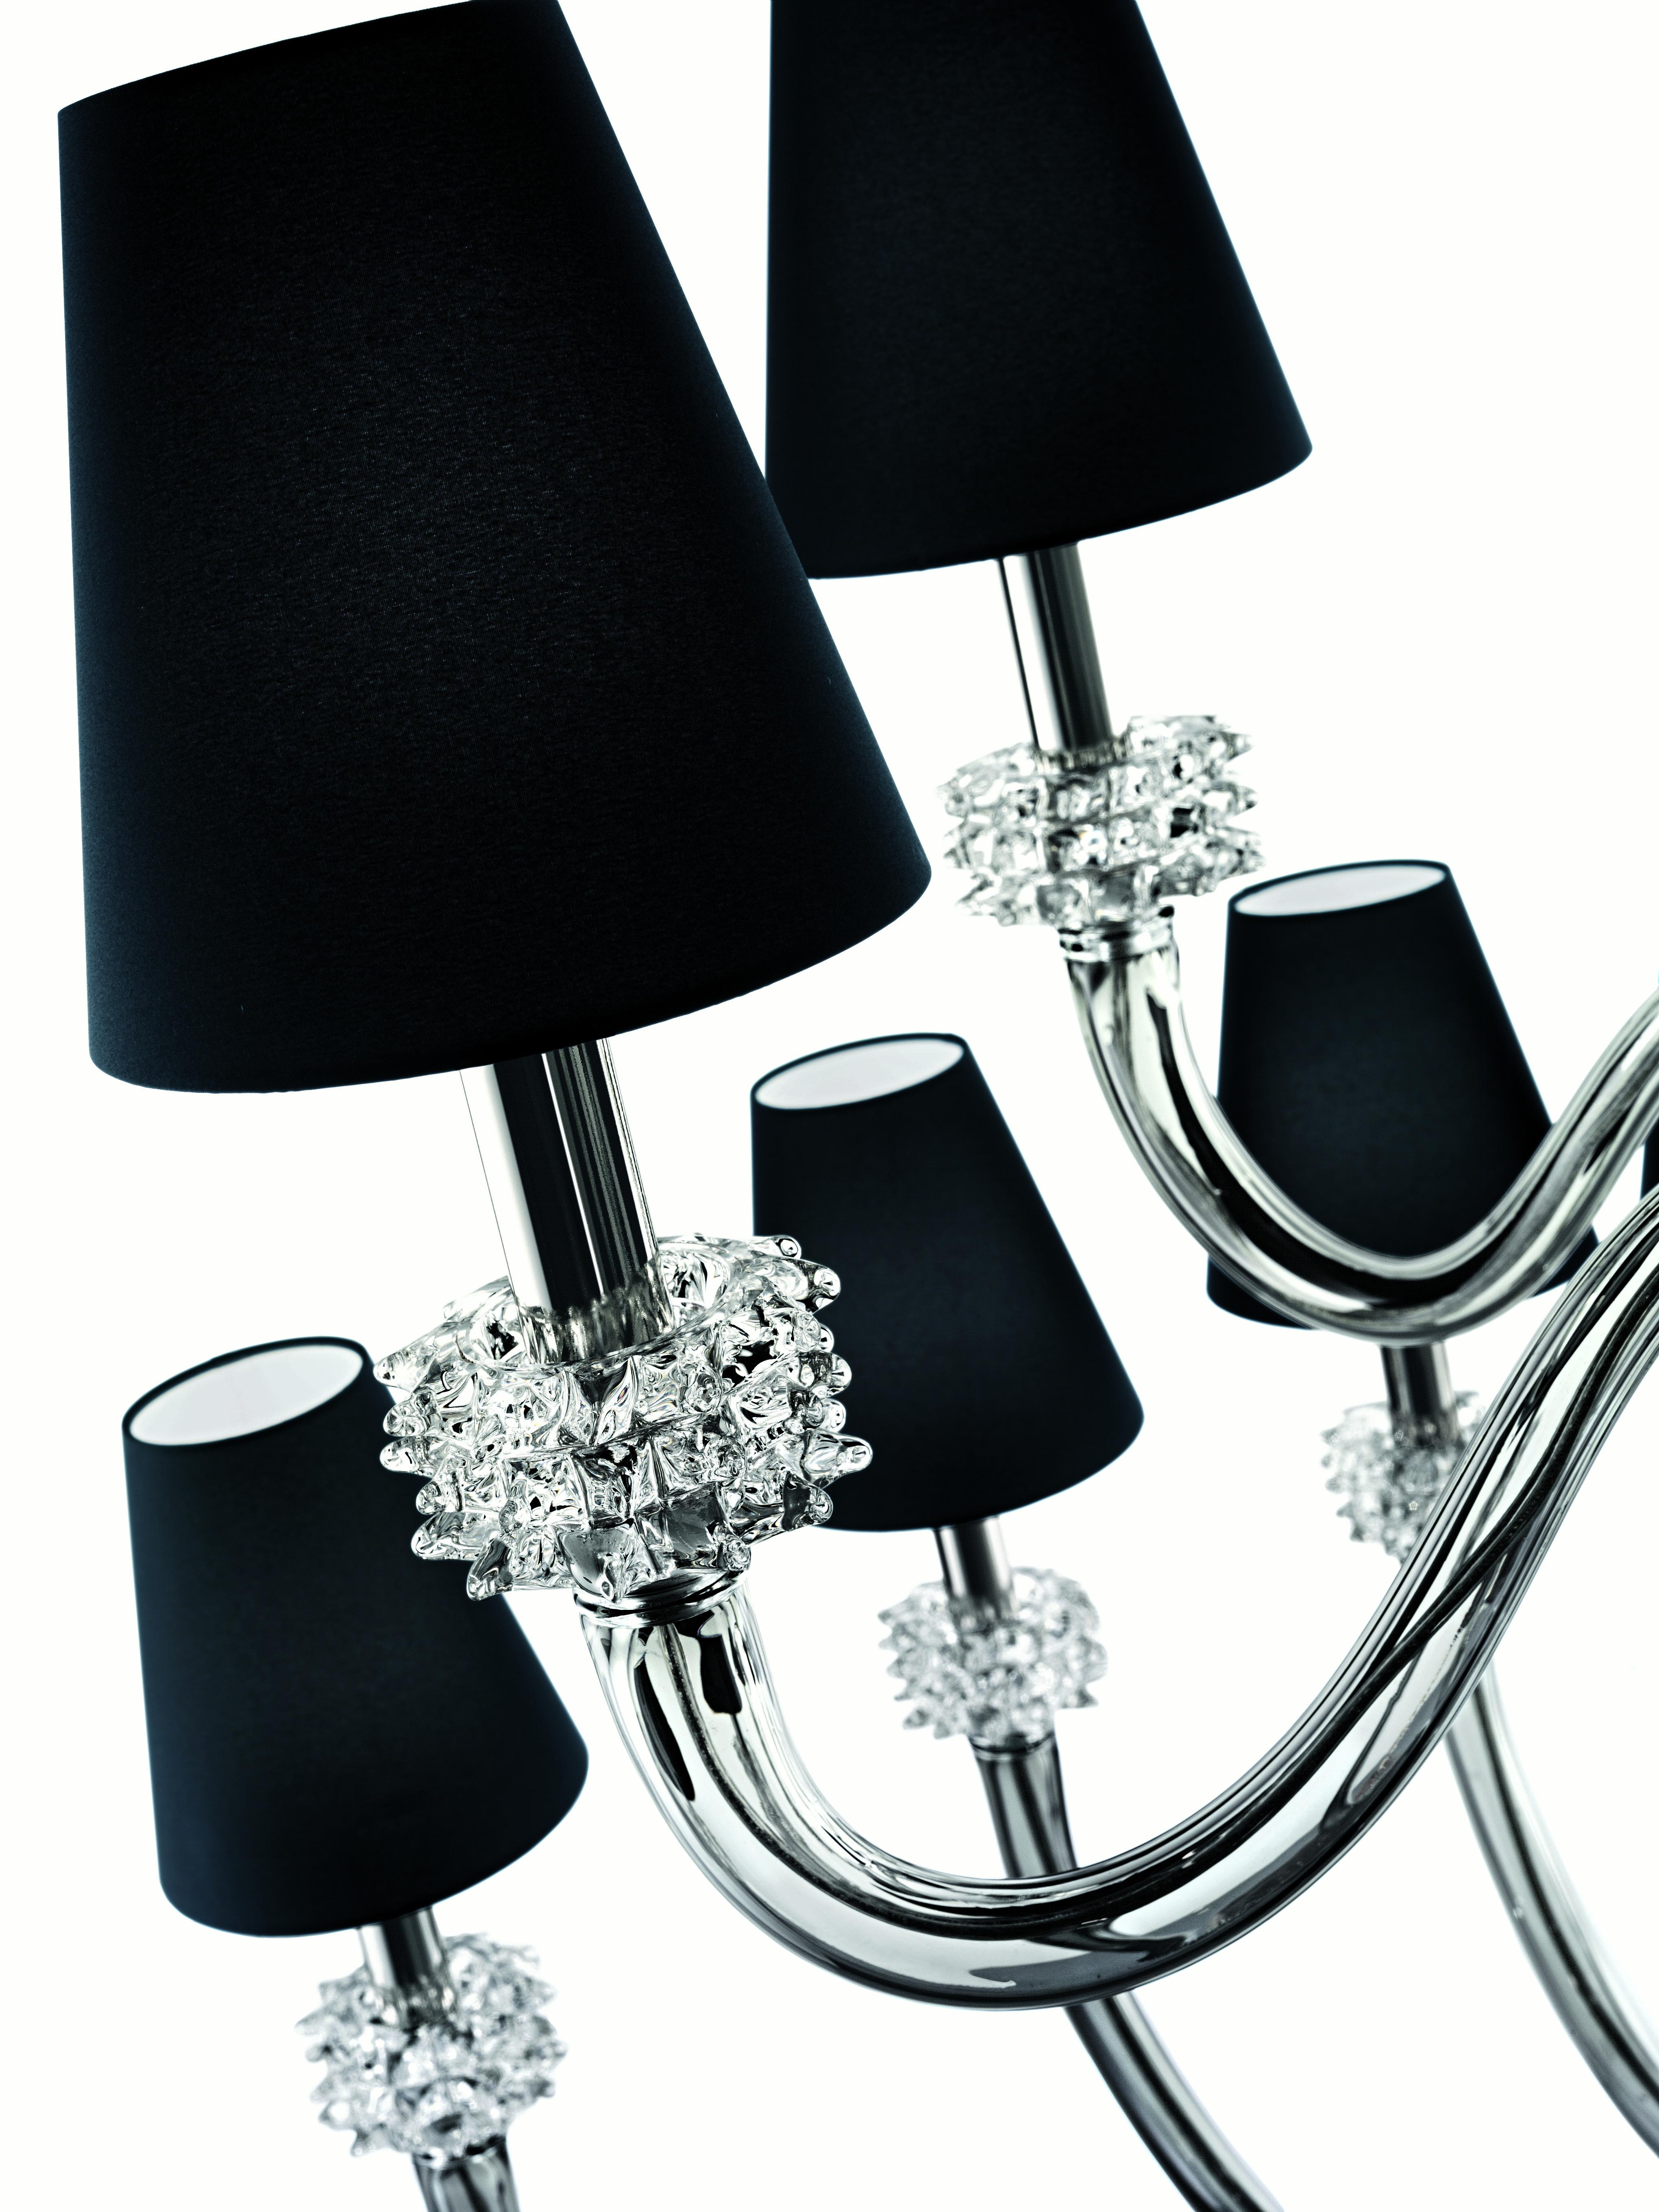 Gray (Grey_IC) Amsterdam 5562 18 Chandelier in Chrome & Glass, Black Shade, by Barovier&Toso 7